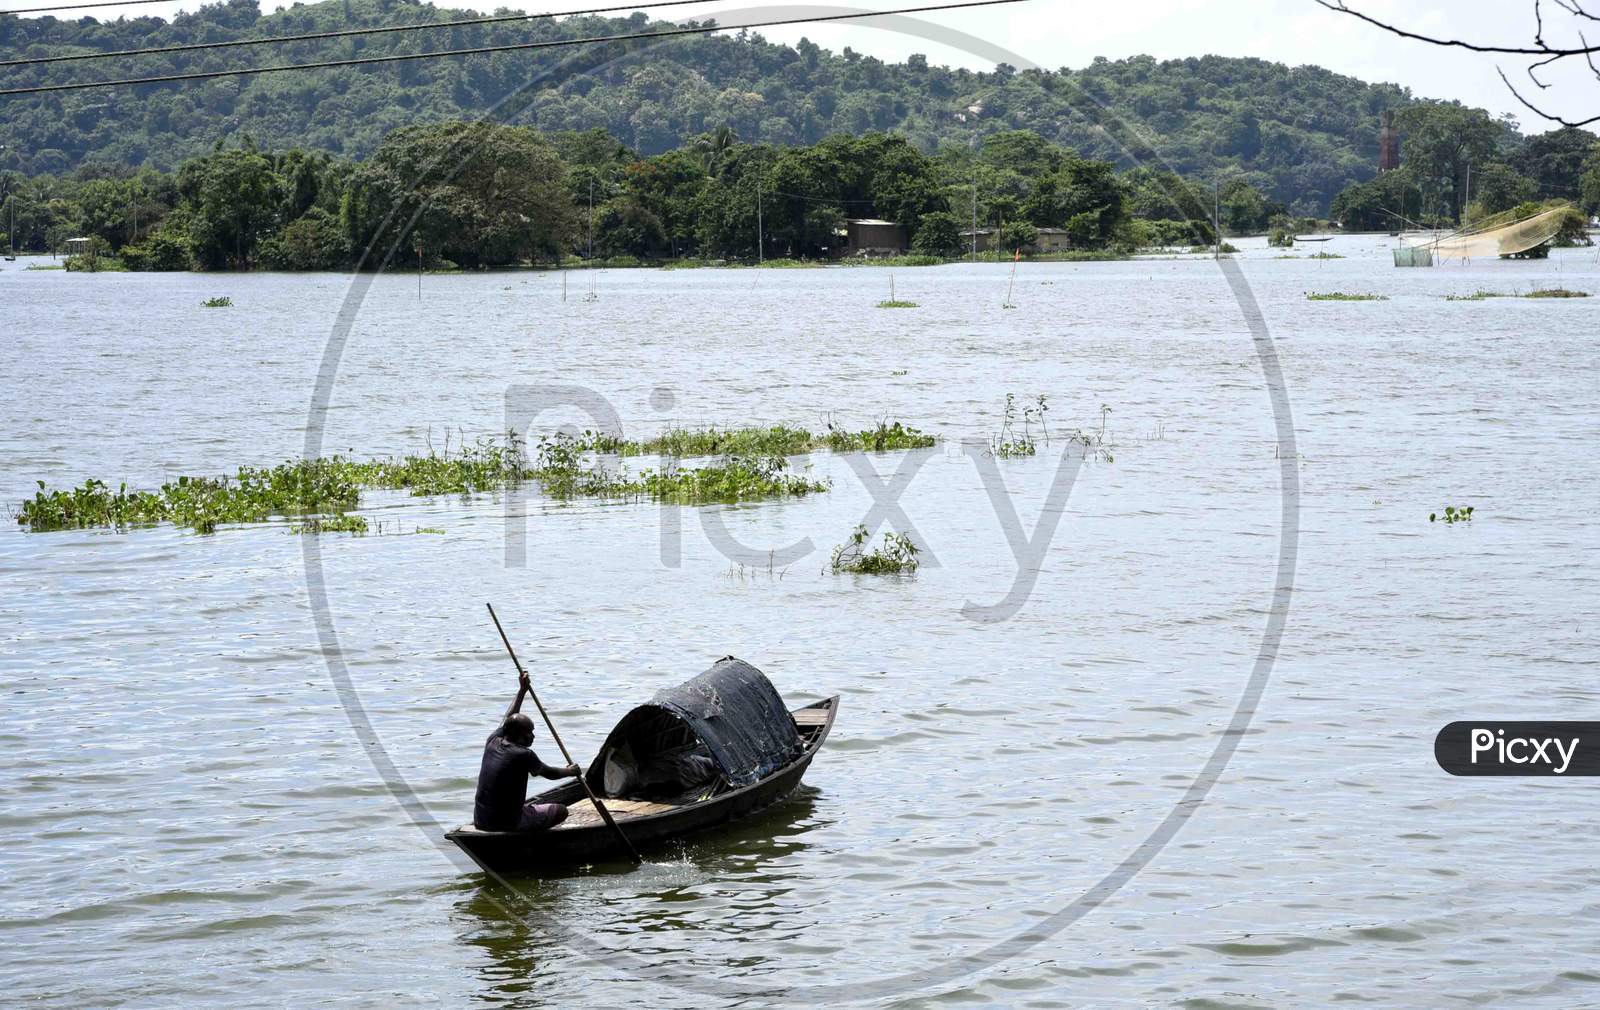 A Fisherman  rows a boat on a flooded area